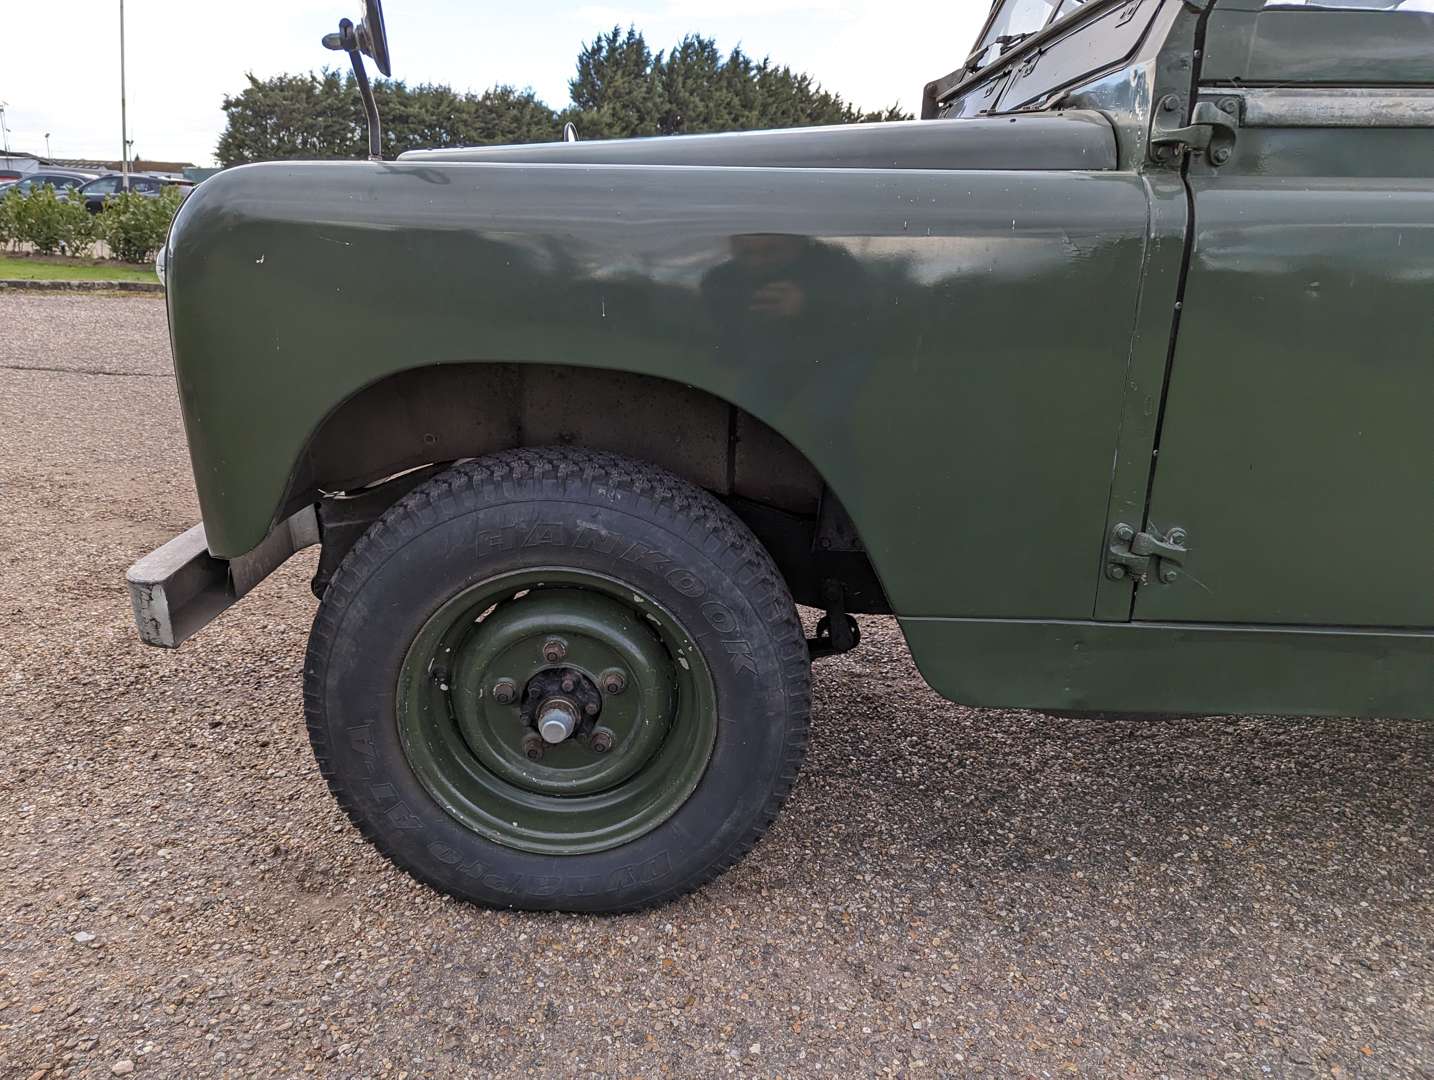 1958 LAND ROVER SWB SERIES II - Image 15 of 26